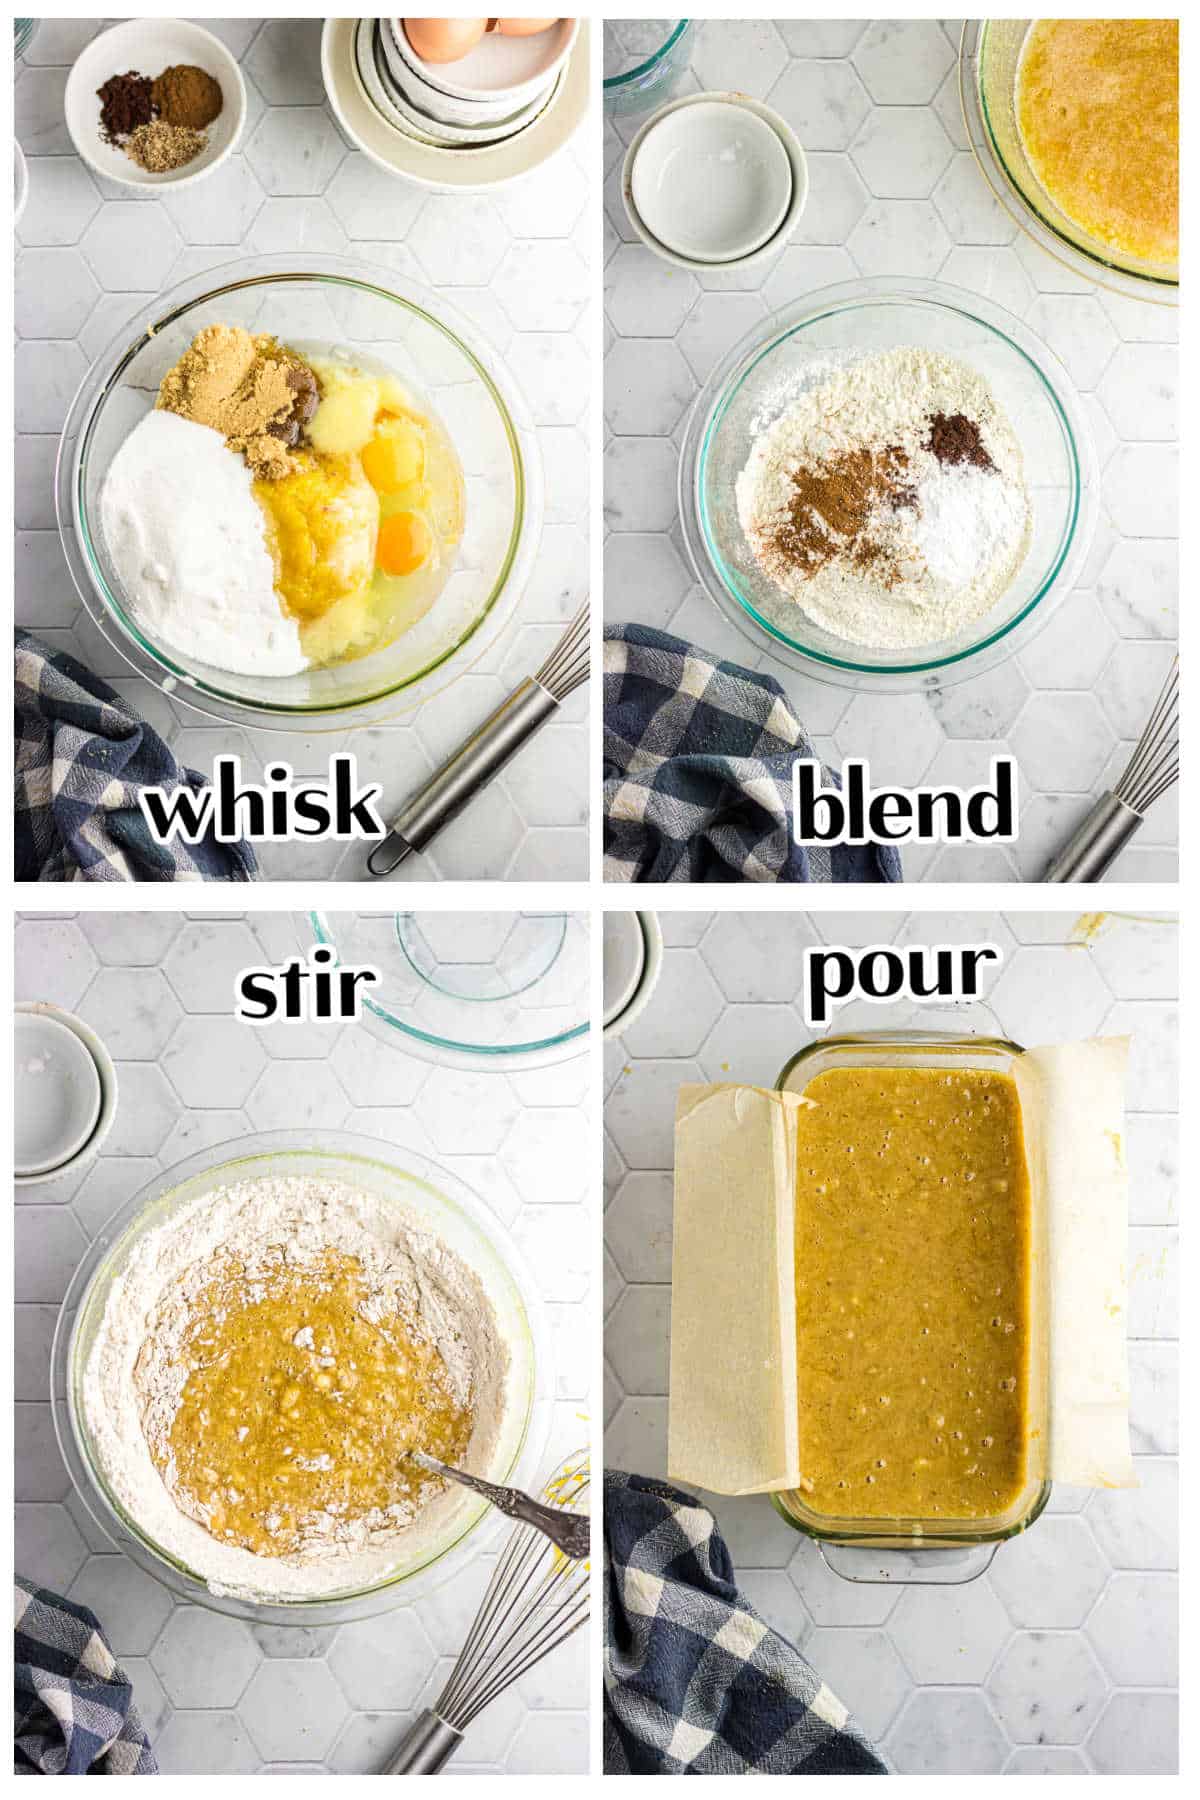 Step by step images showing how to make acorn squash bread.